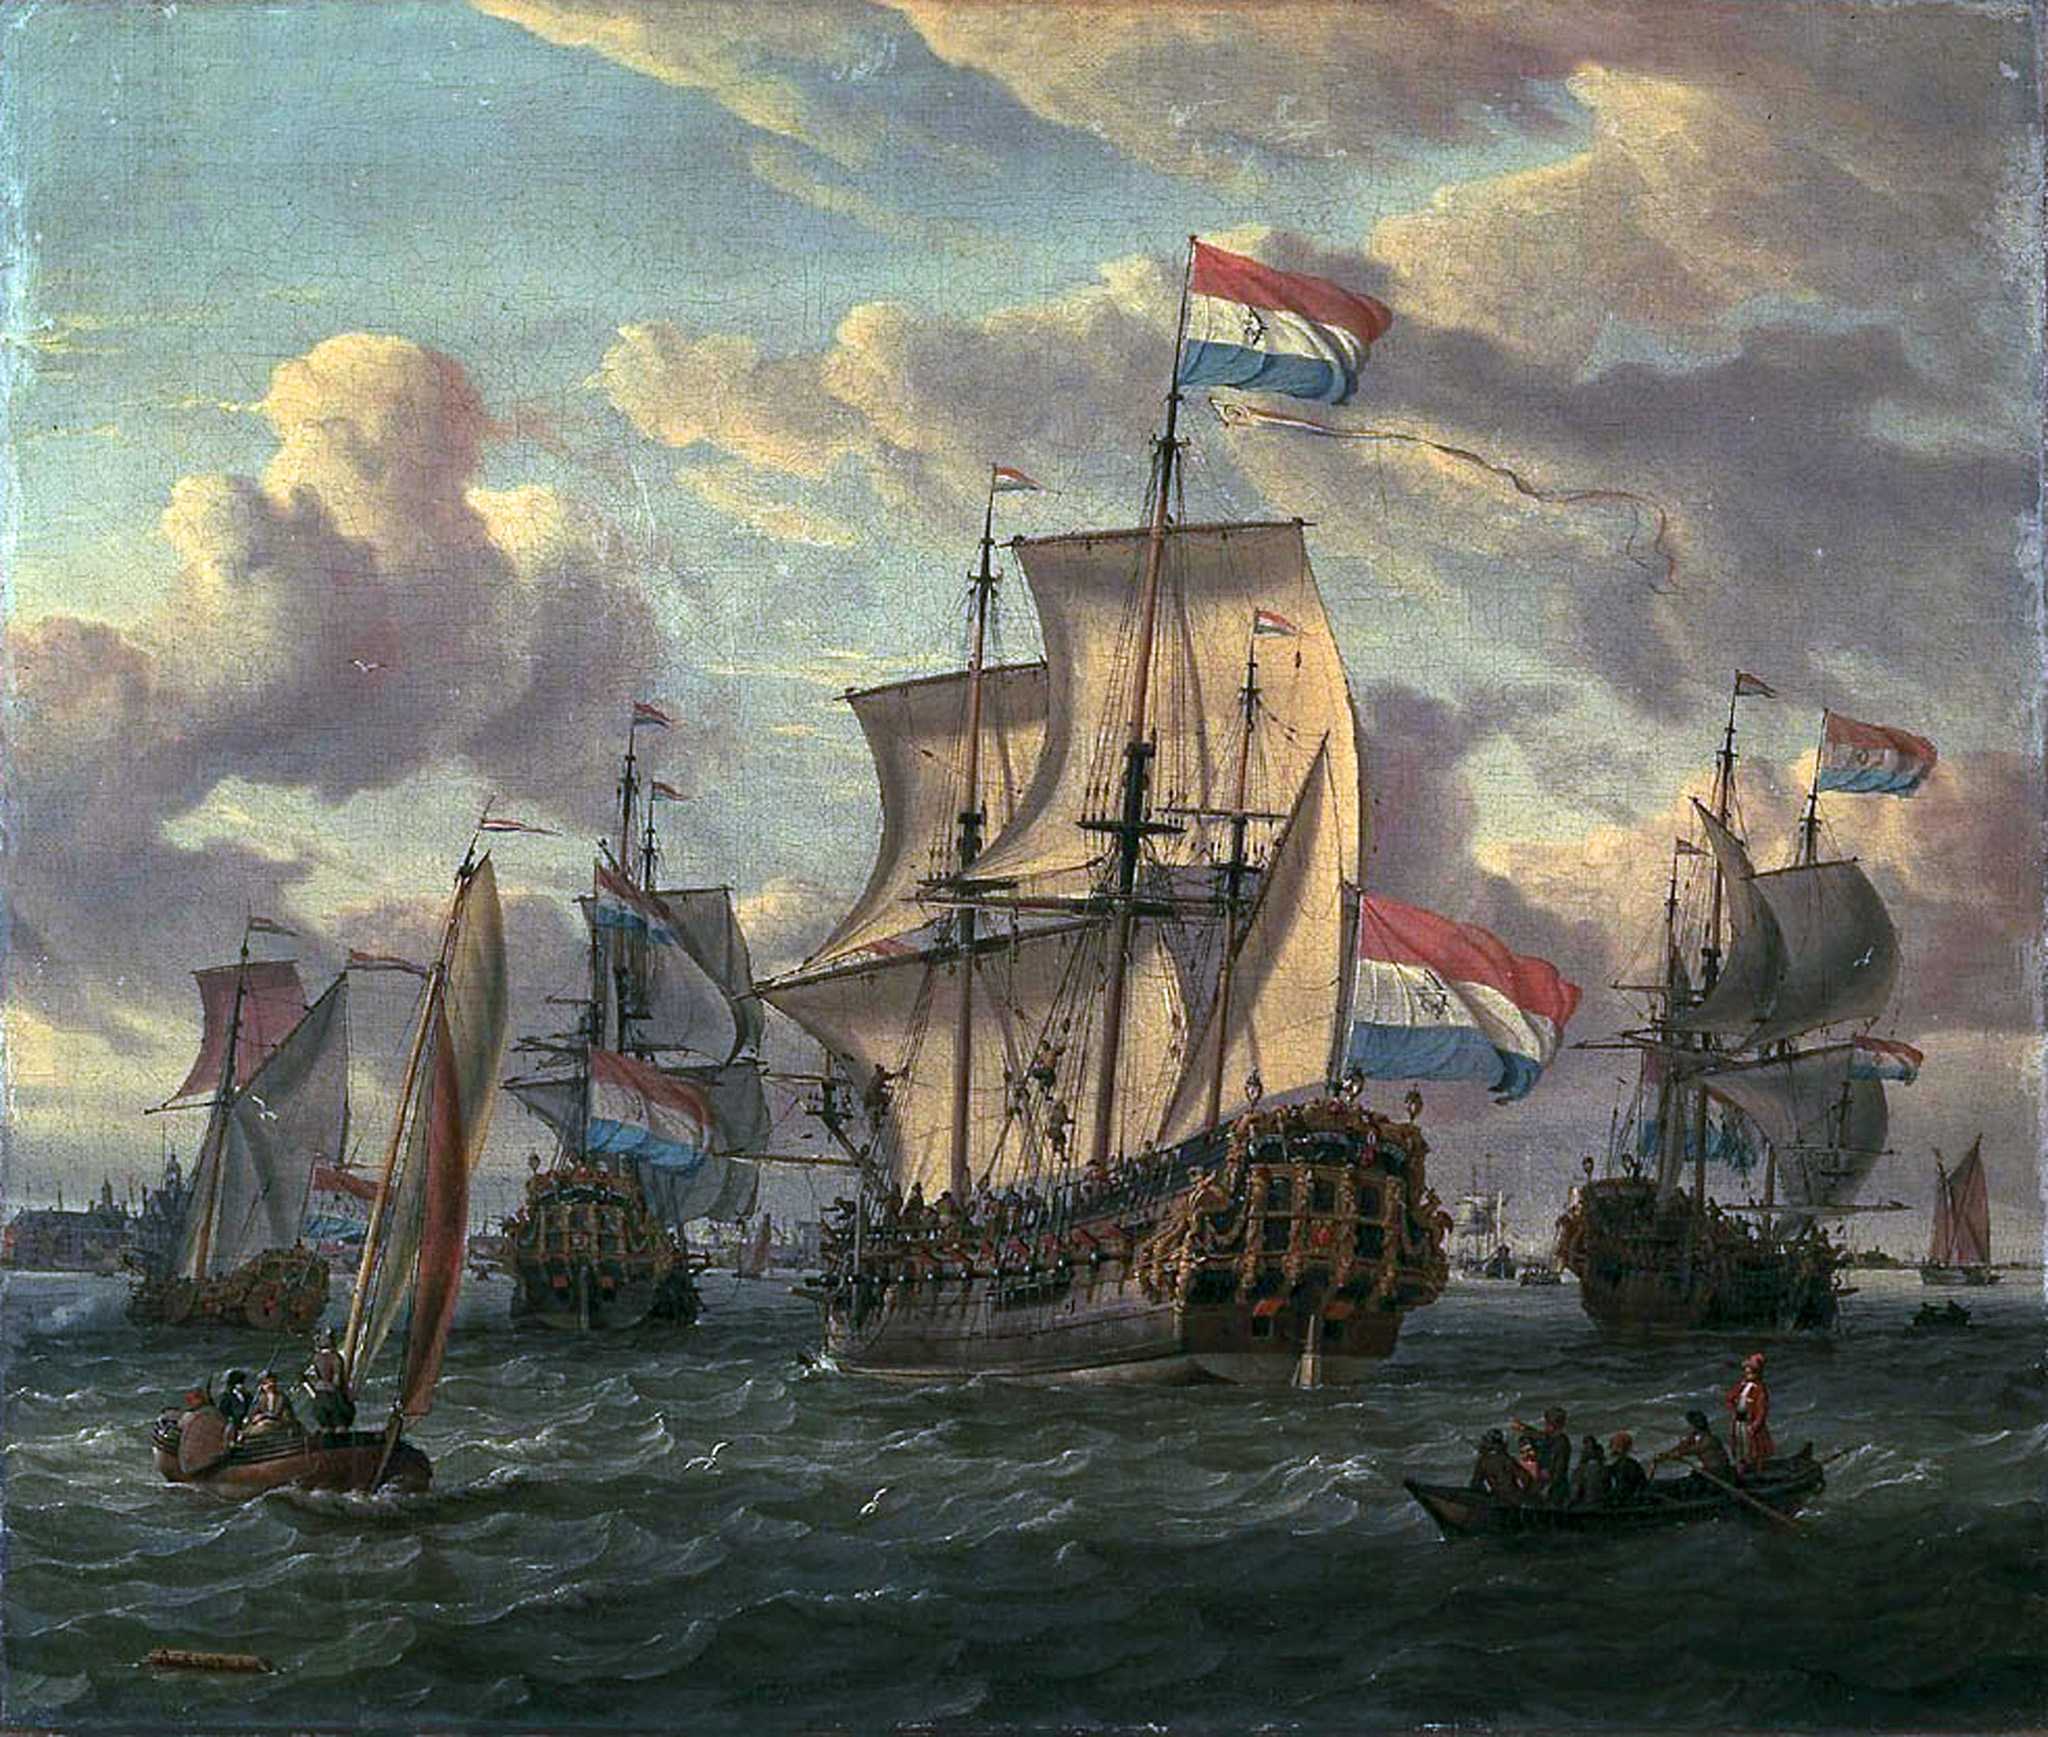 Illustration of Dutch sailing ship used in slave trade